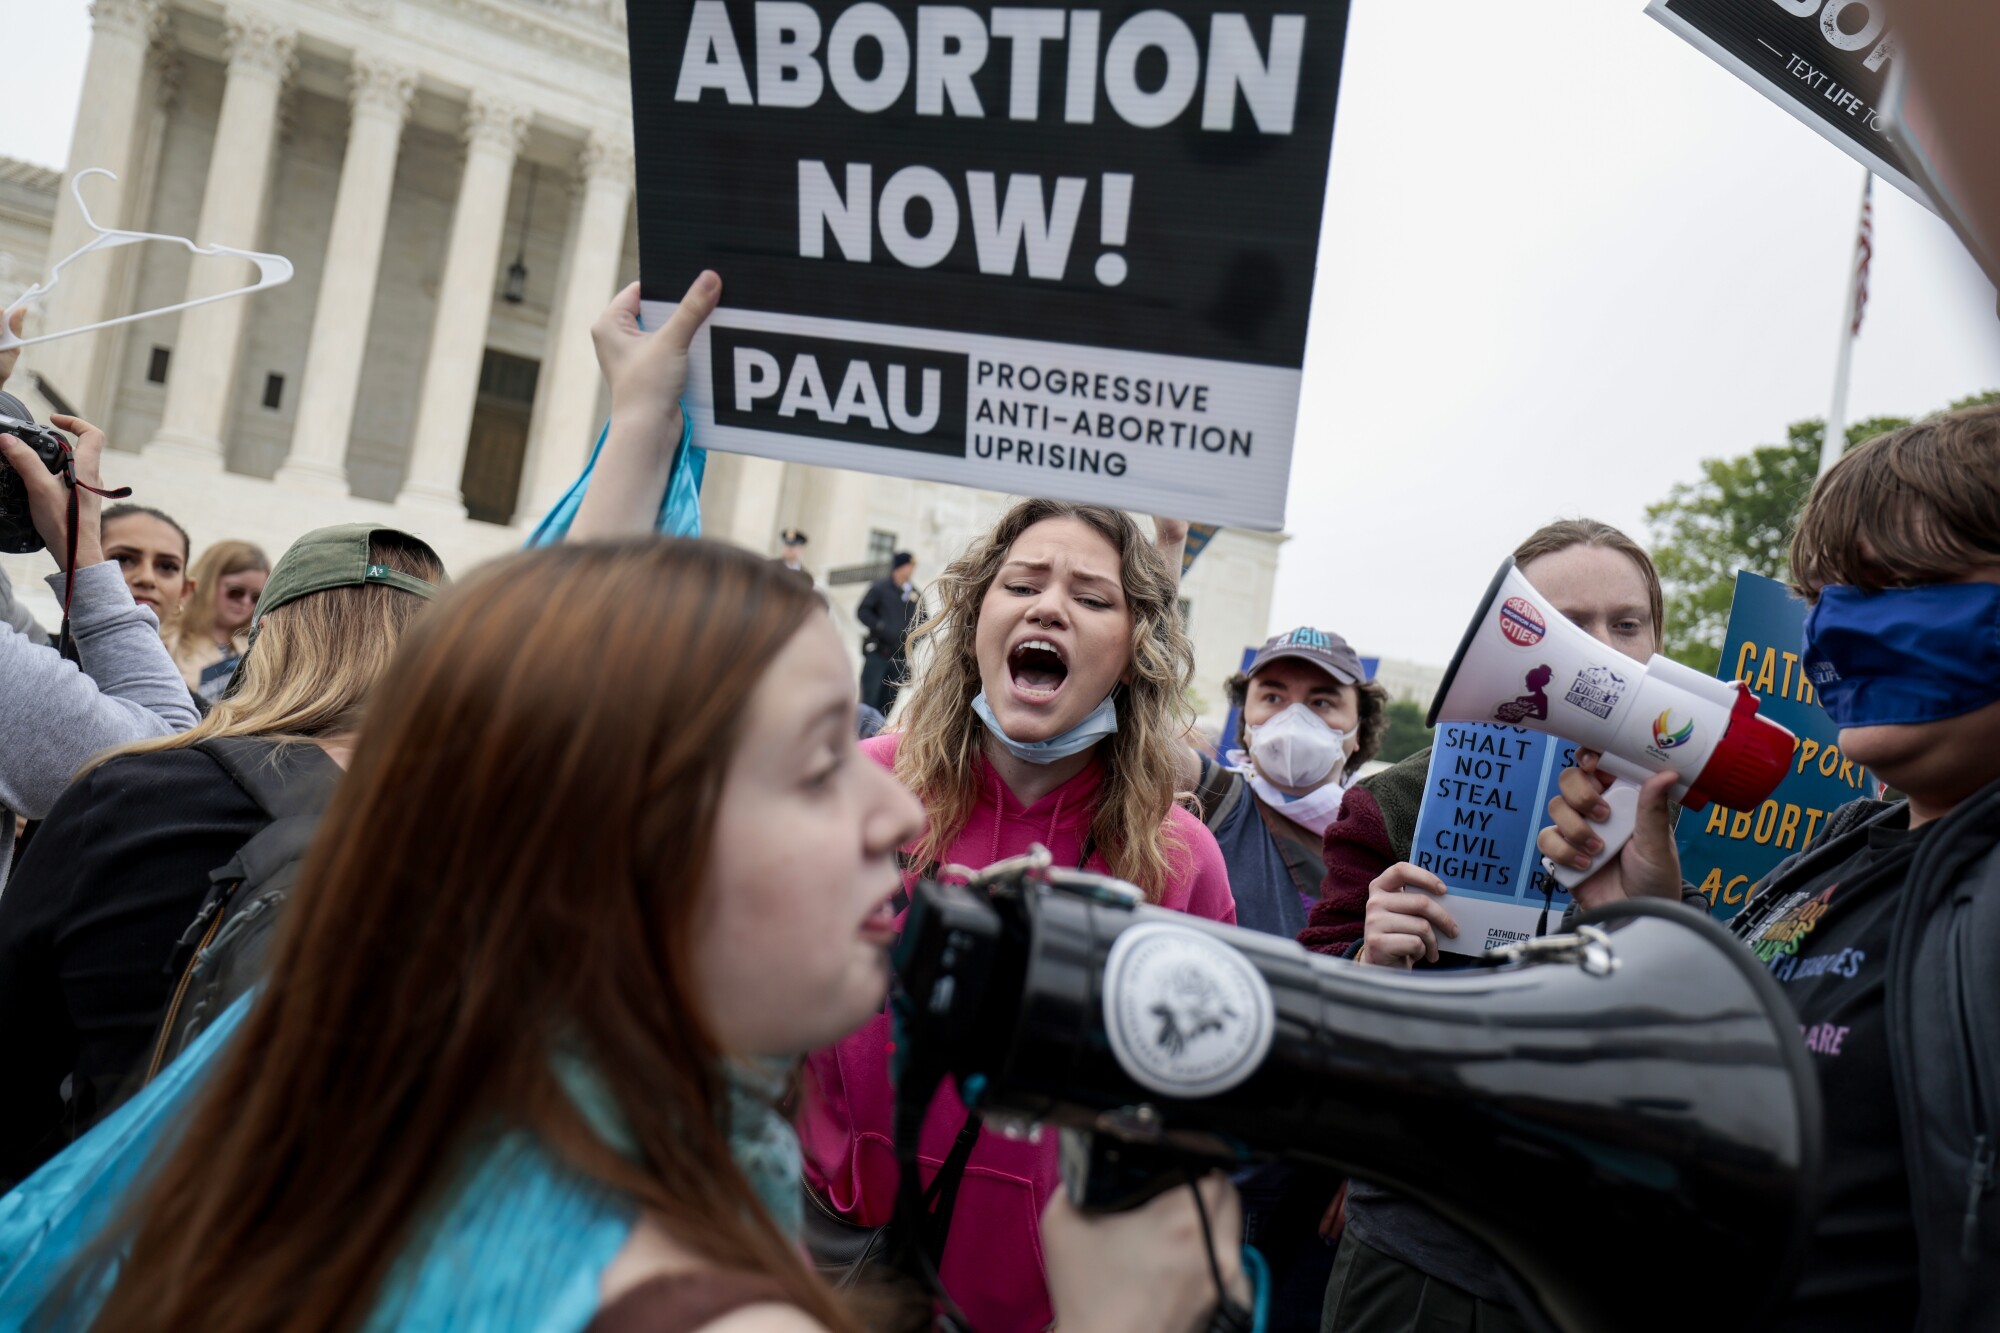 Pro-choice and anti-abortion activists demonstrate in front of the U.S. Supreme Court Building in Washington, DC. 